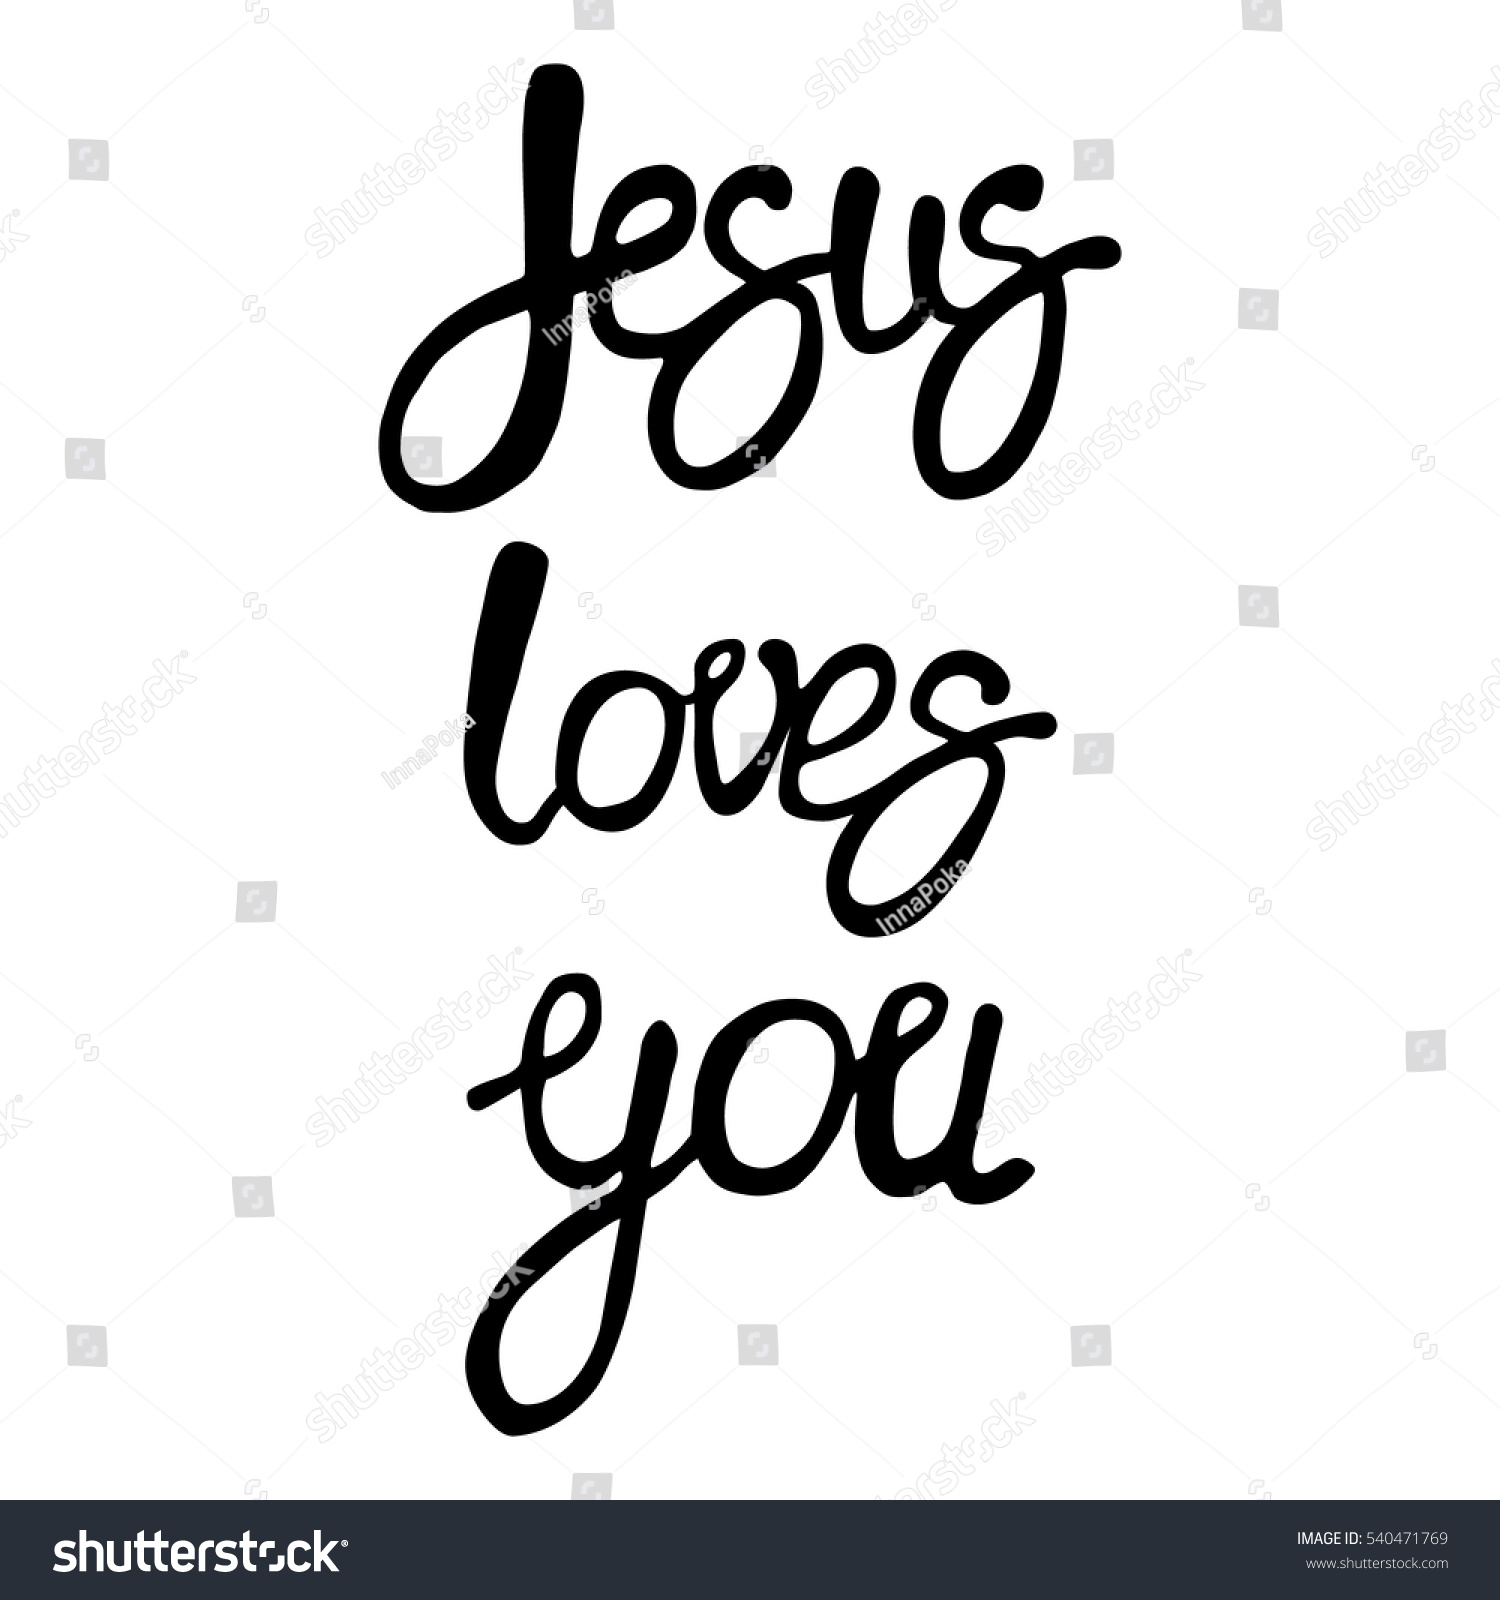 "Jesus loves you" card Hand drawn Vector Inspirational quote Modern "